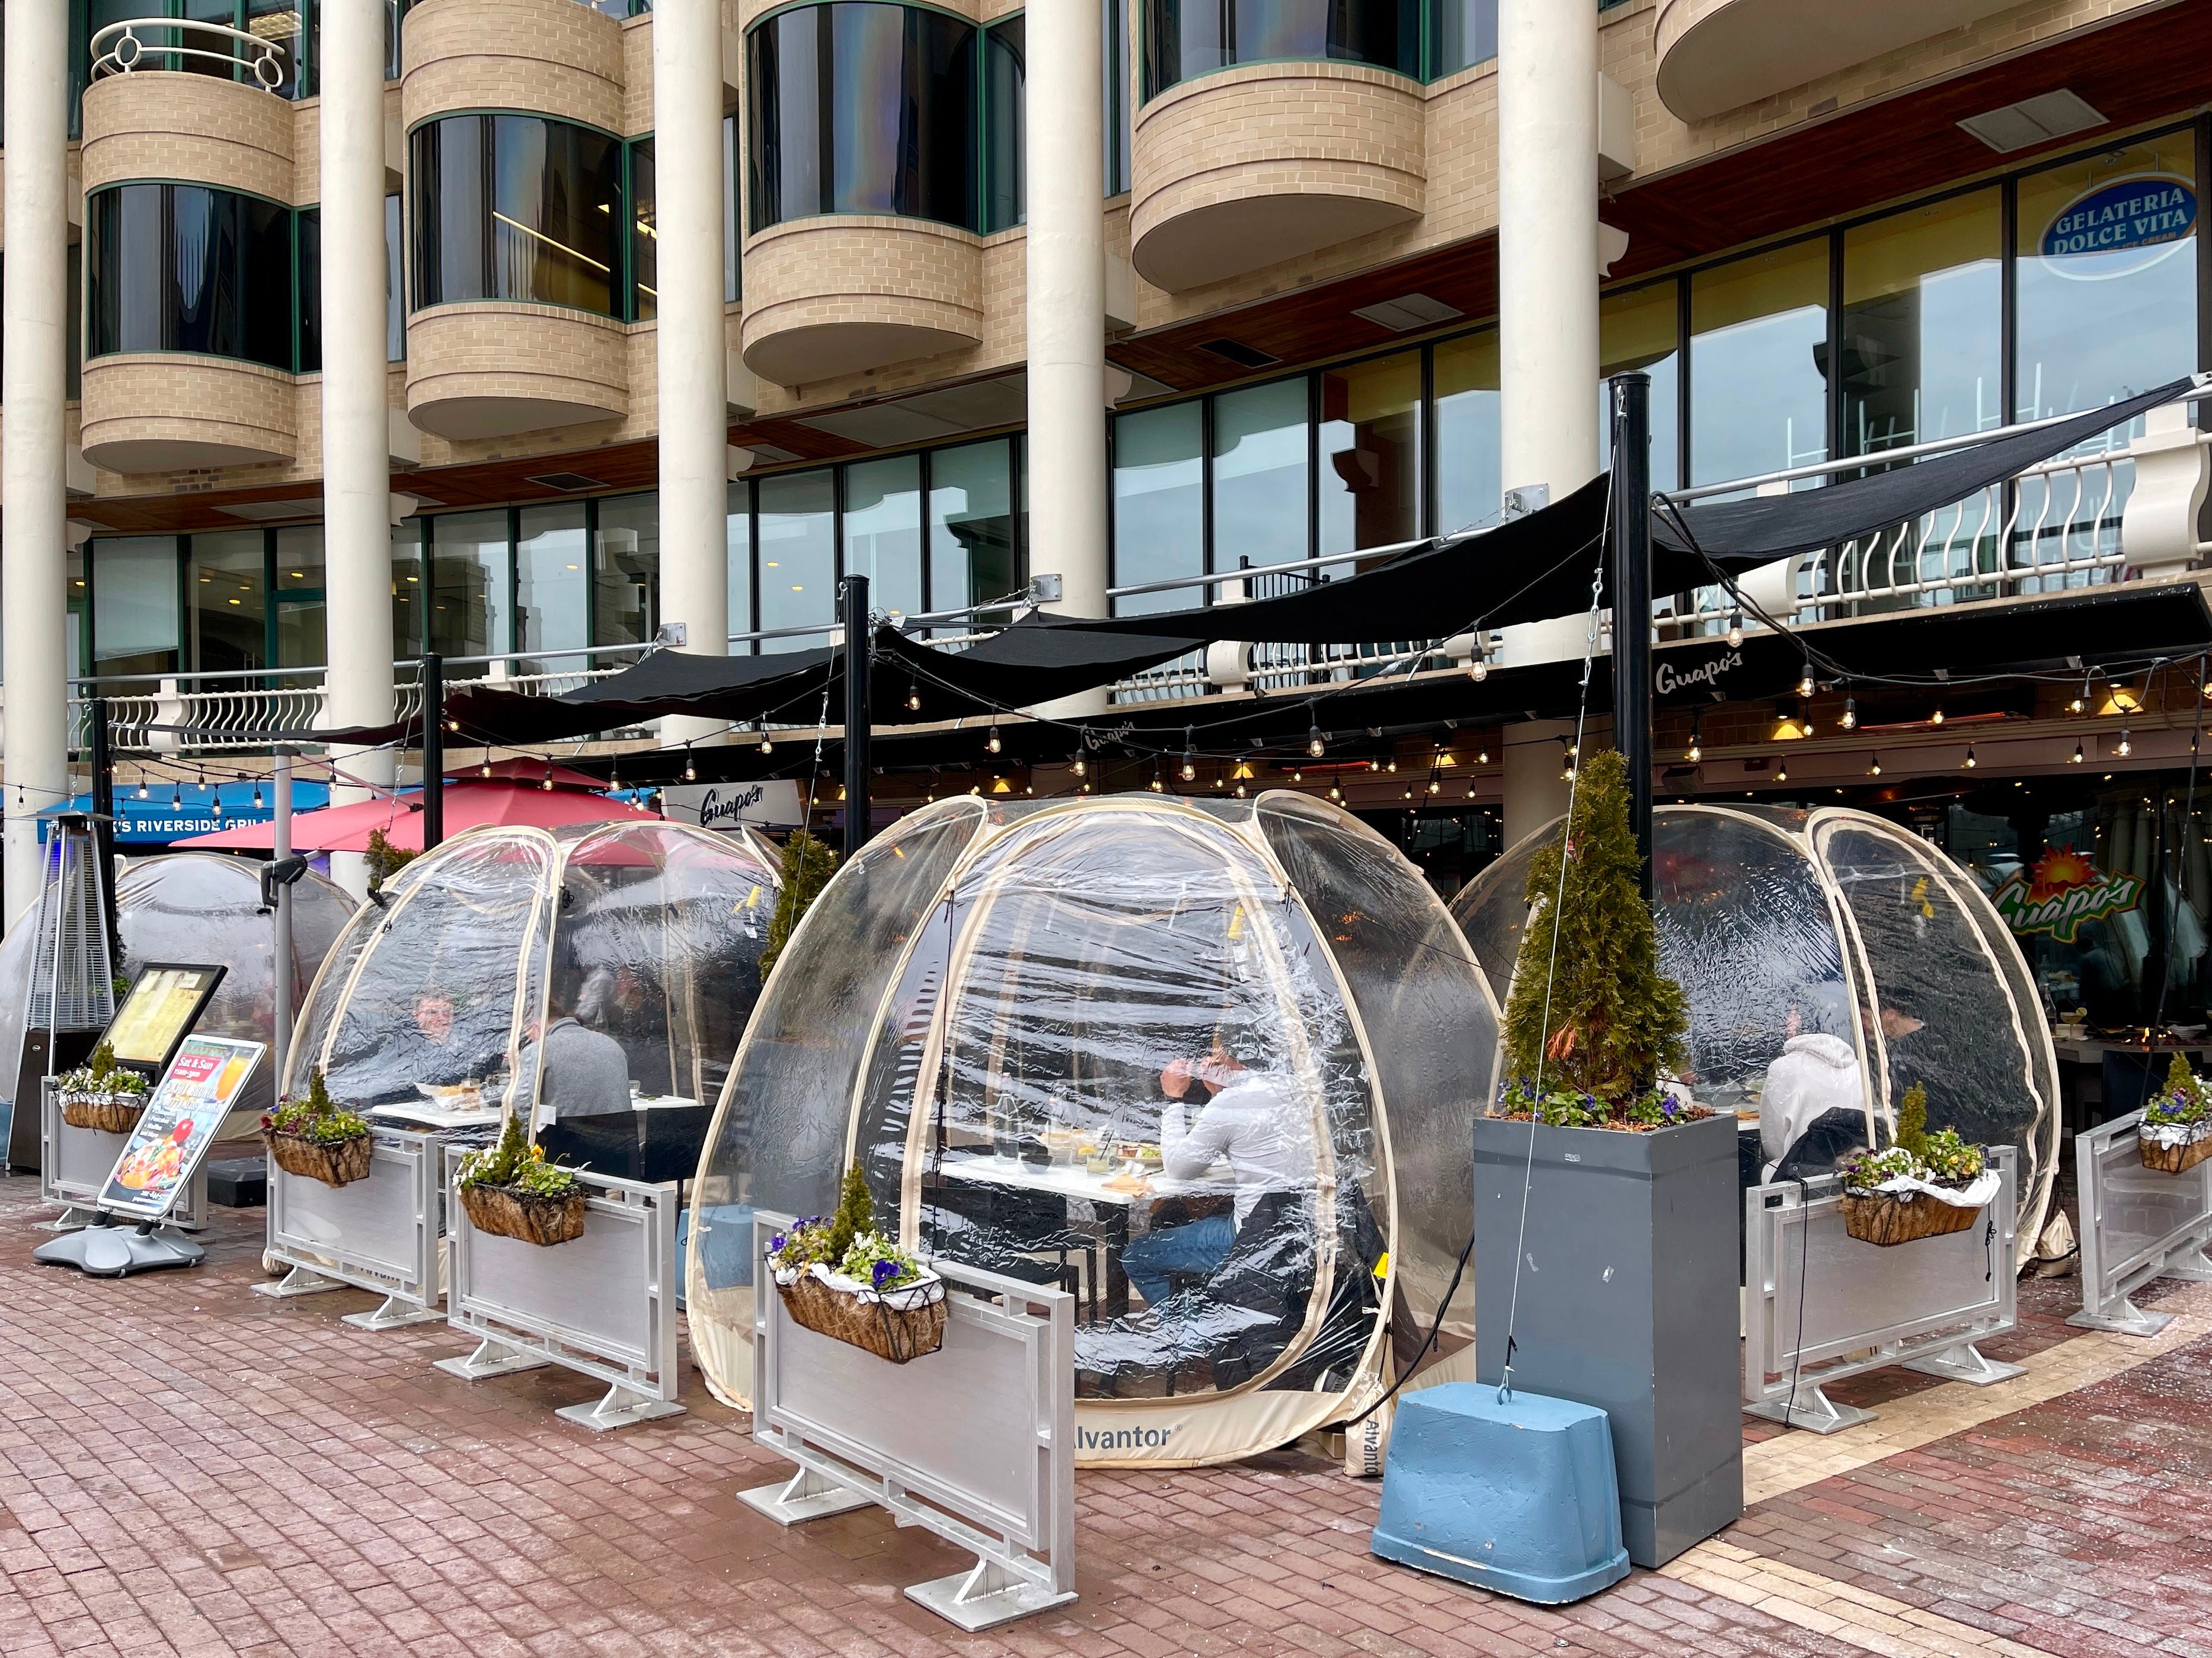 Coronavirus outbreak in the US has prompted restaurants owners to innovate enclose plastic domes dining areas